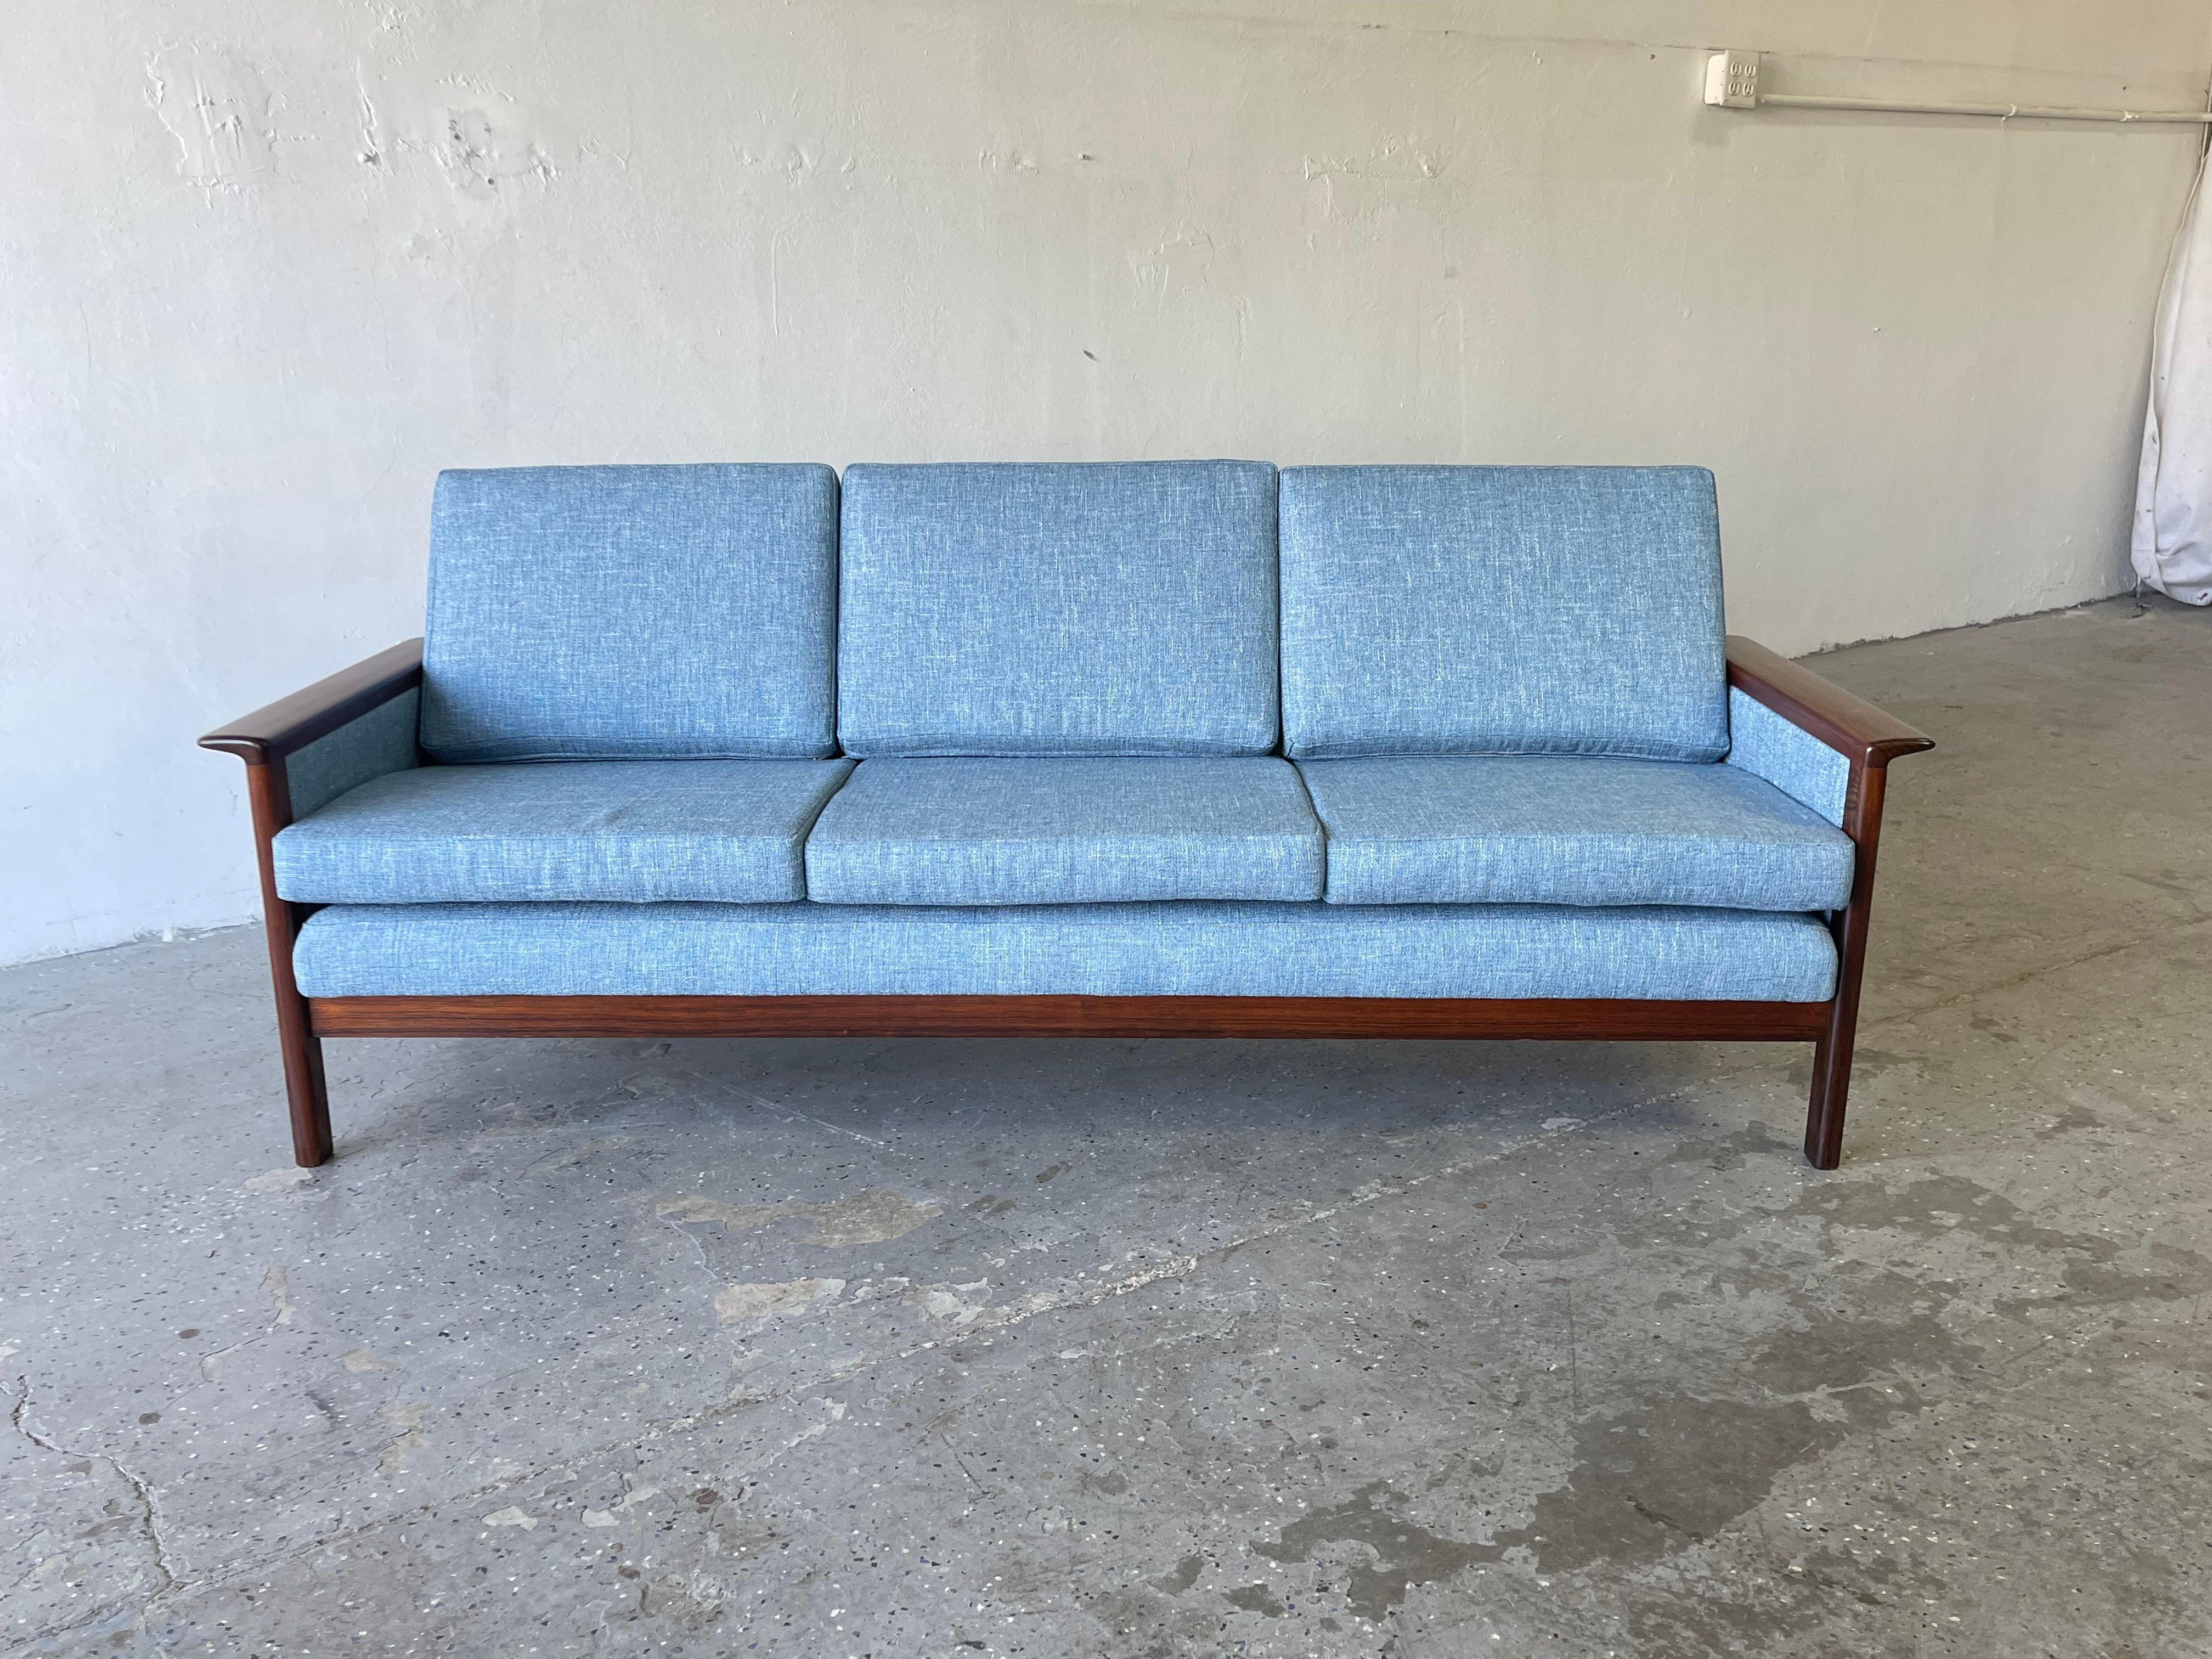 Vintage Danish Mid-Century Modern Rosewood Sofa & Lounge Chair by Westnofa For Sale 2